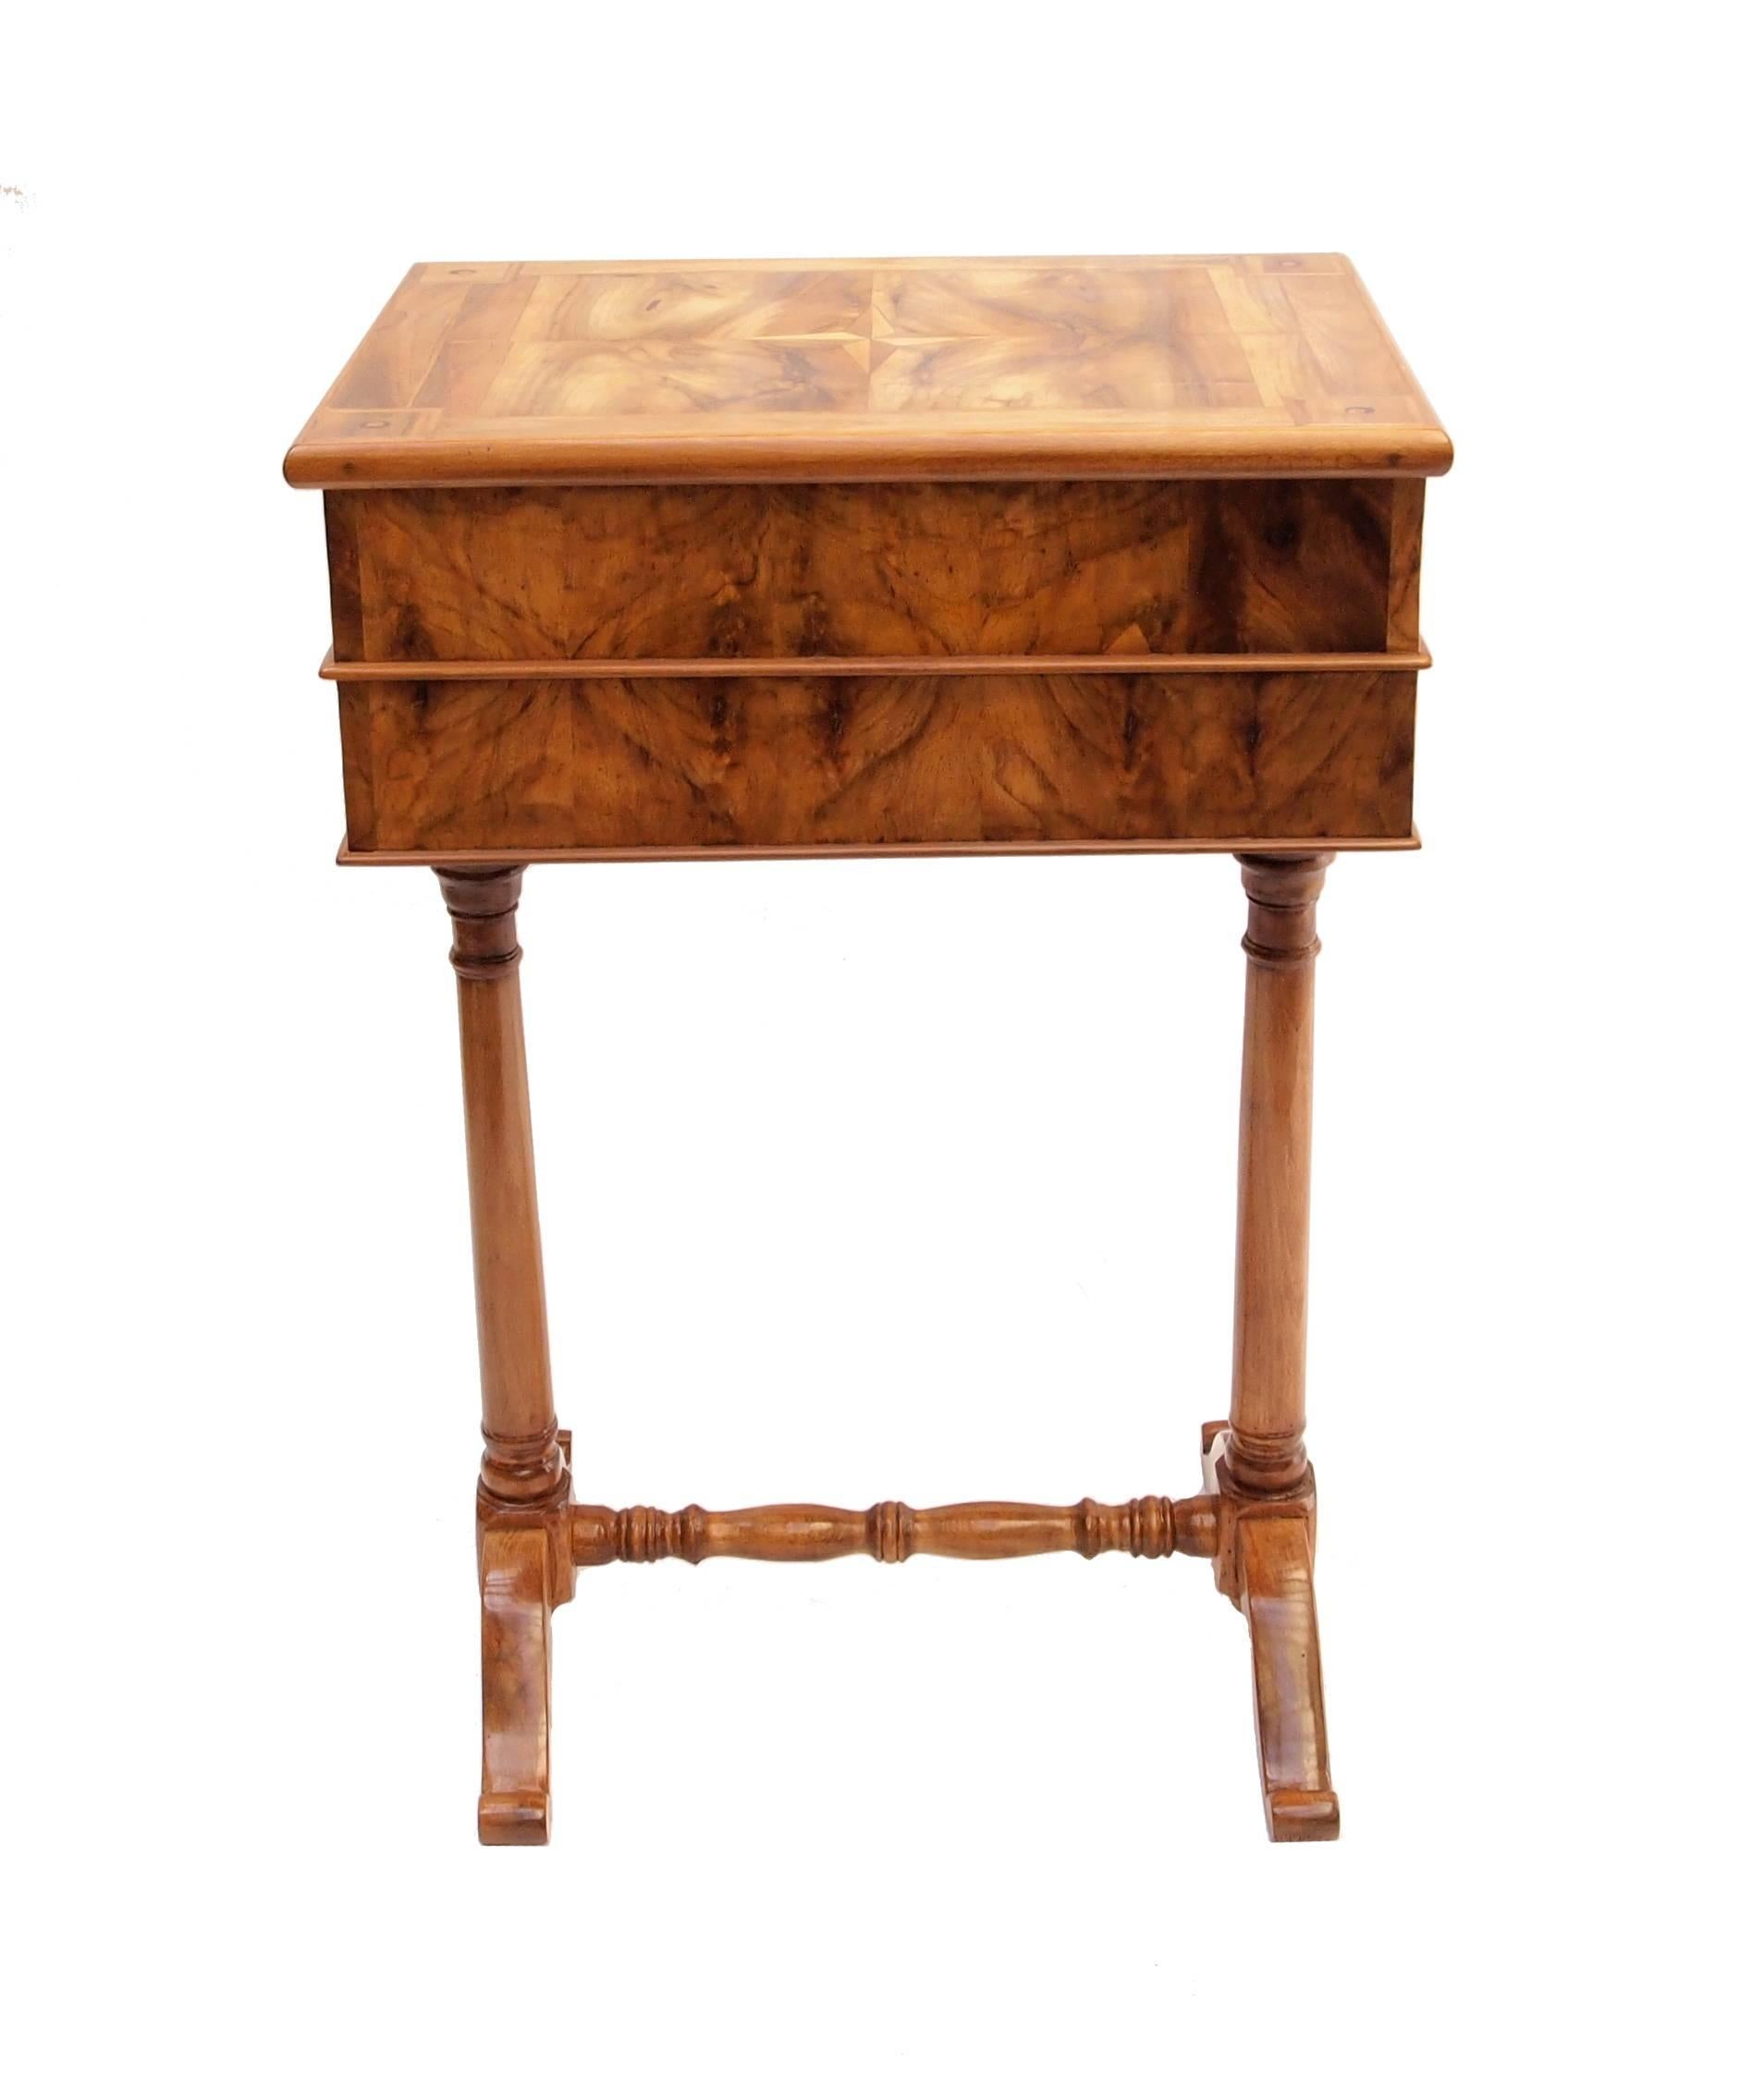 19th Century Biedermeier Walnut Sewing Table from Germany In Good Condition For Sale In Darmstadt, DE